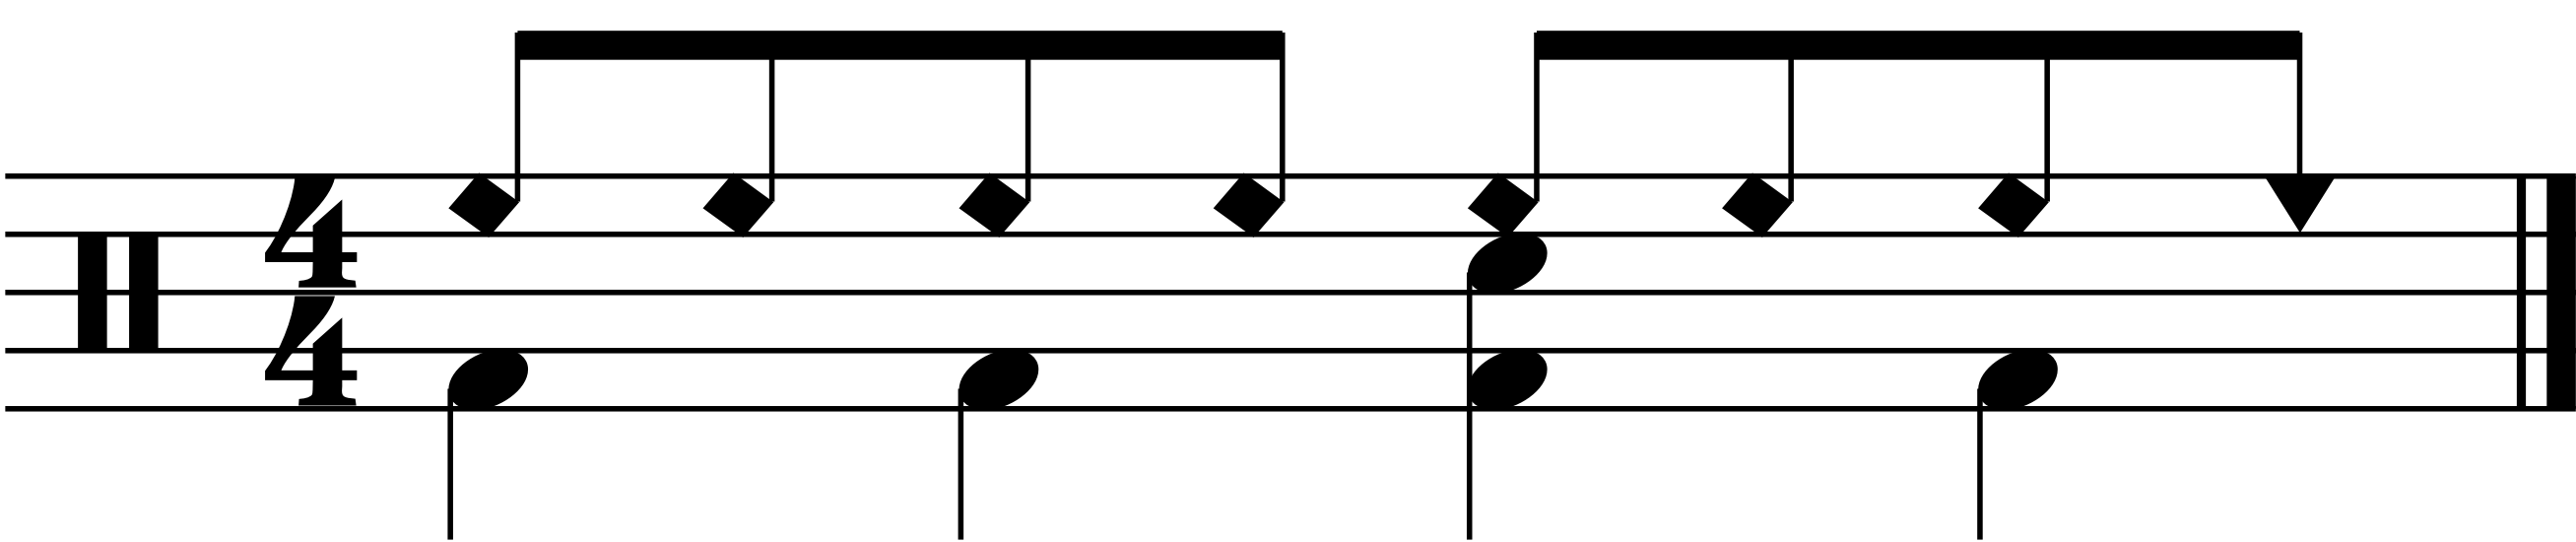 A groove with the right hand played on a cowbell